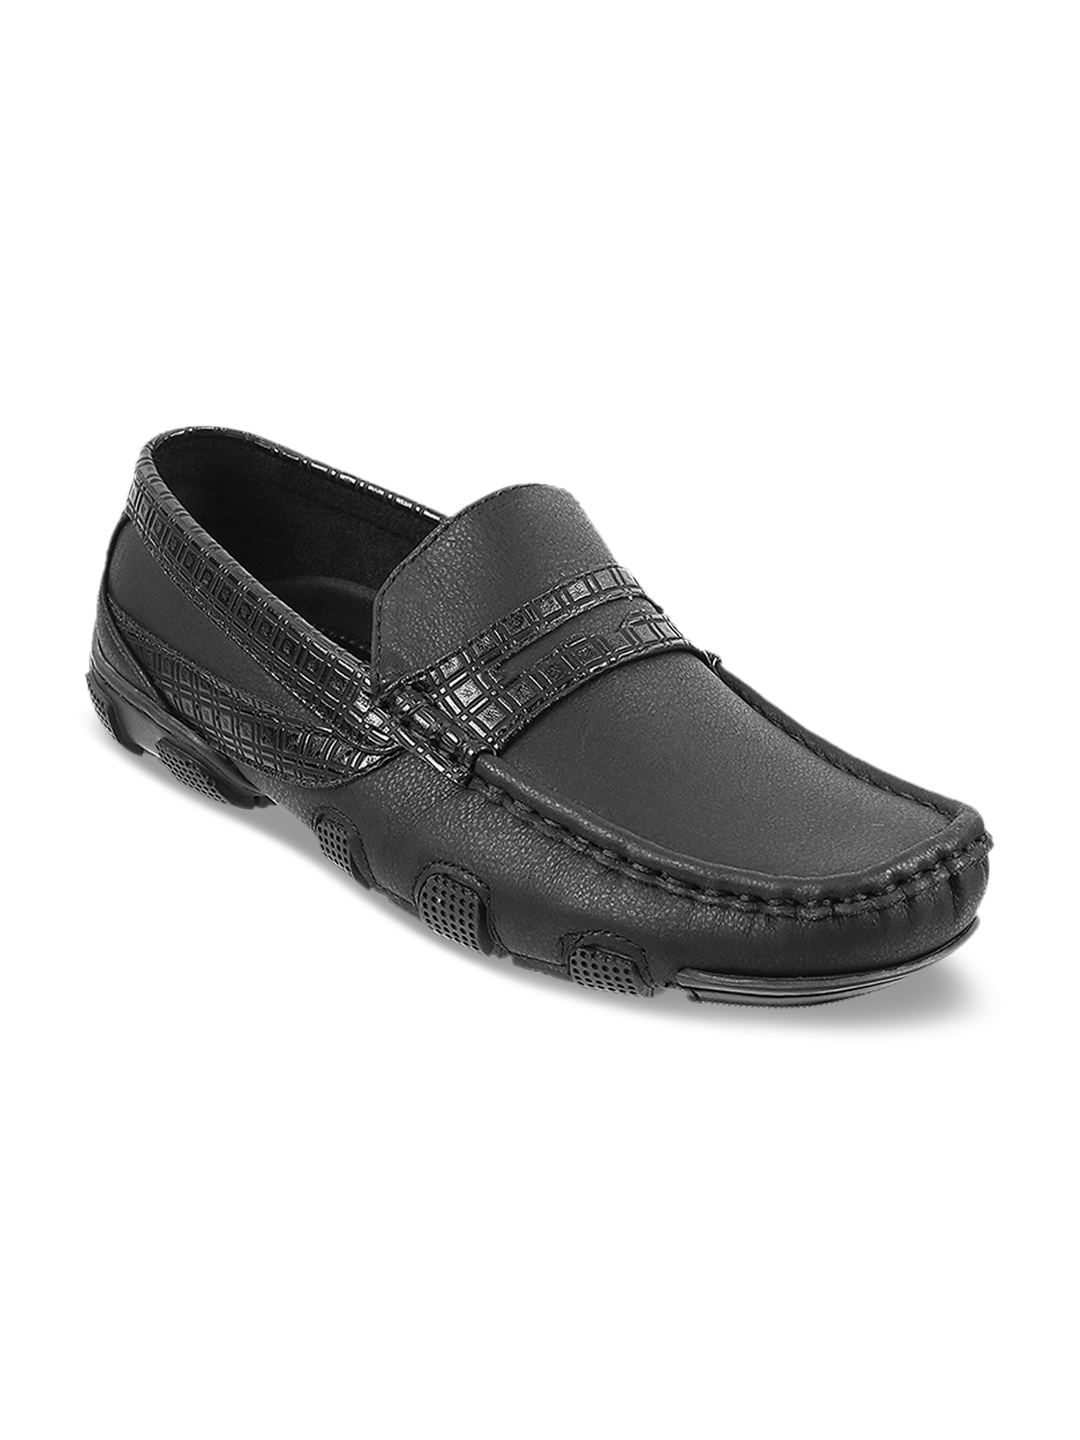 Buy Metro Boys Black Textured Loafers - Casual Shoes for Boys 8471657 ...